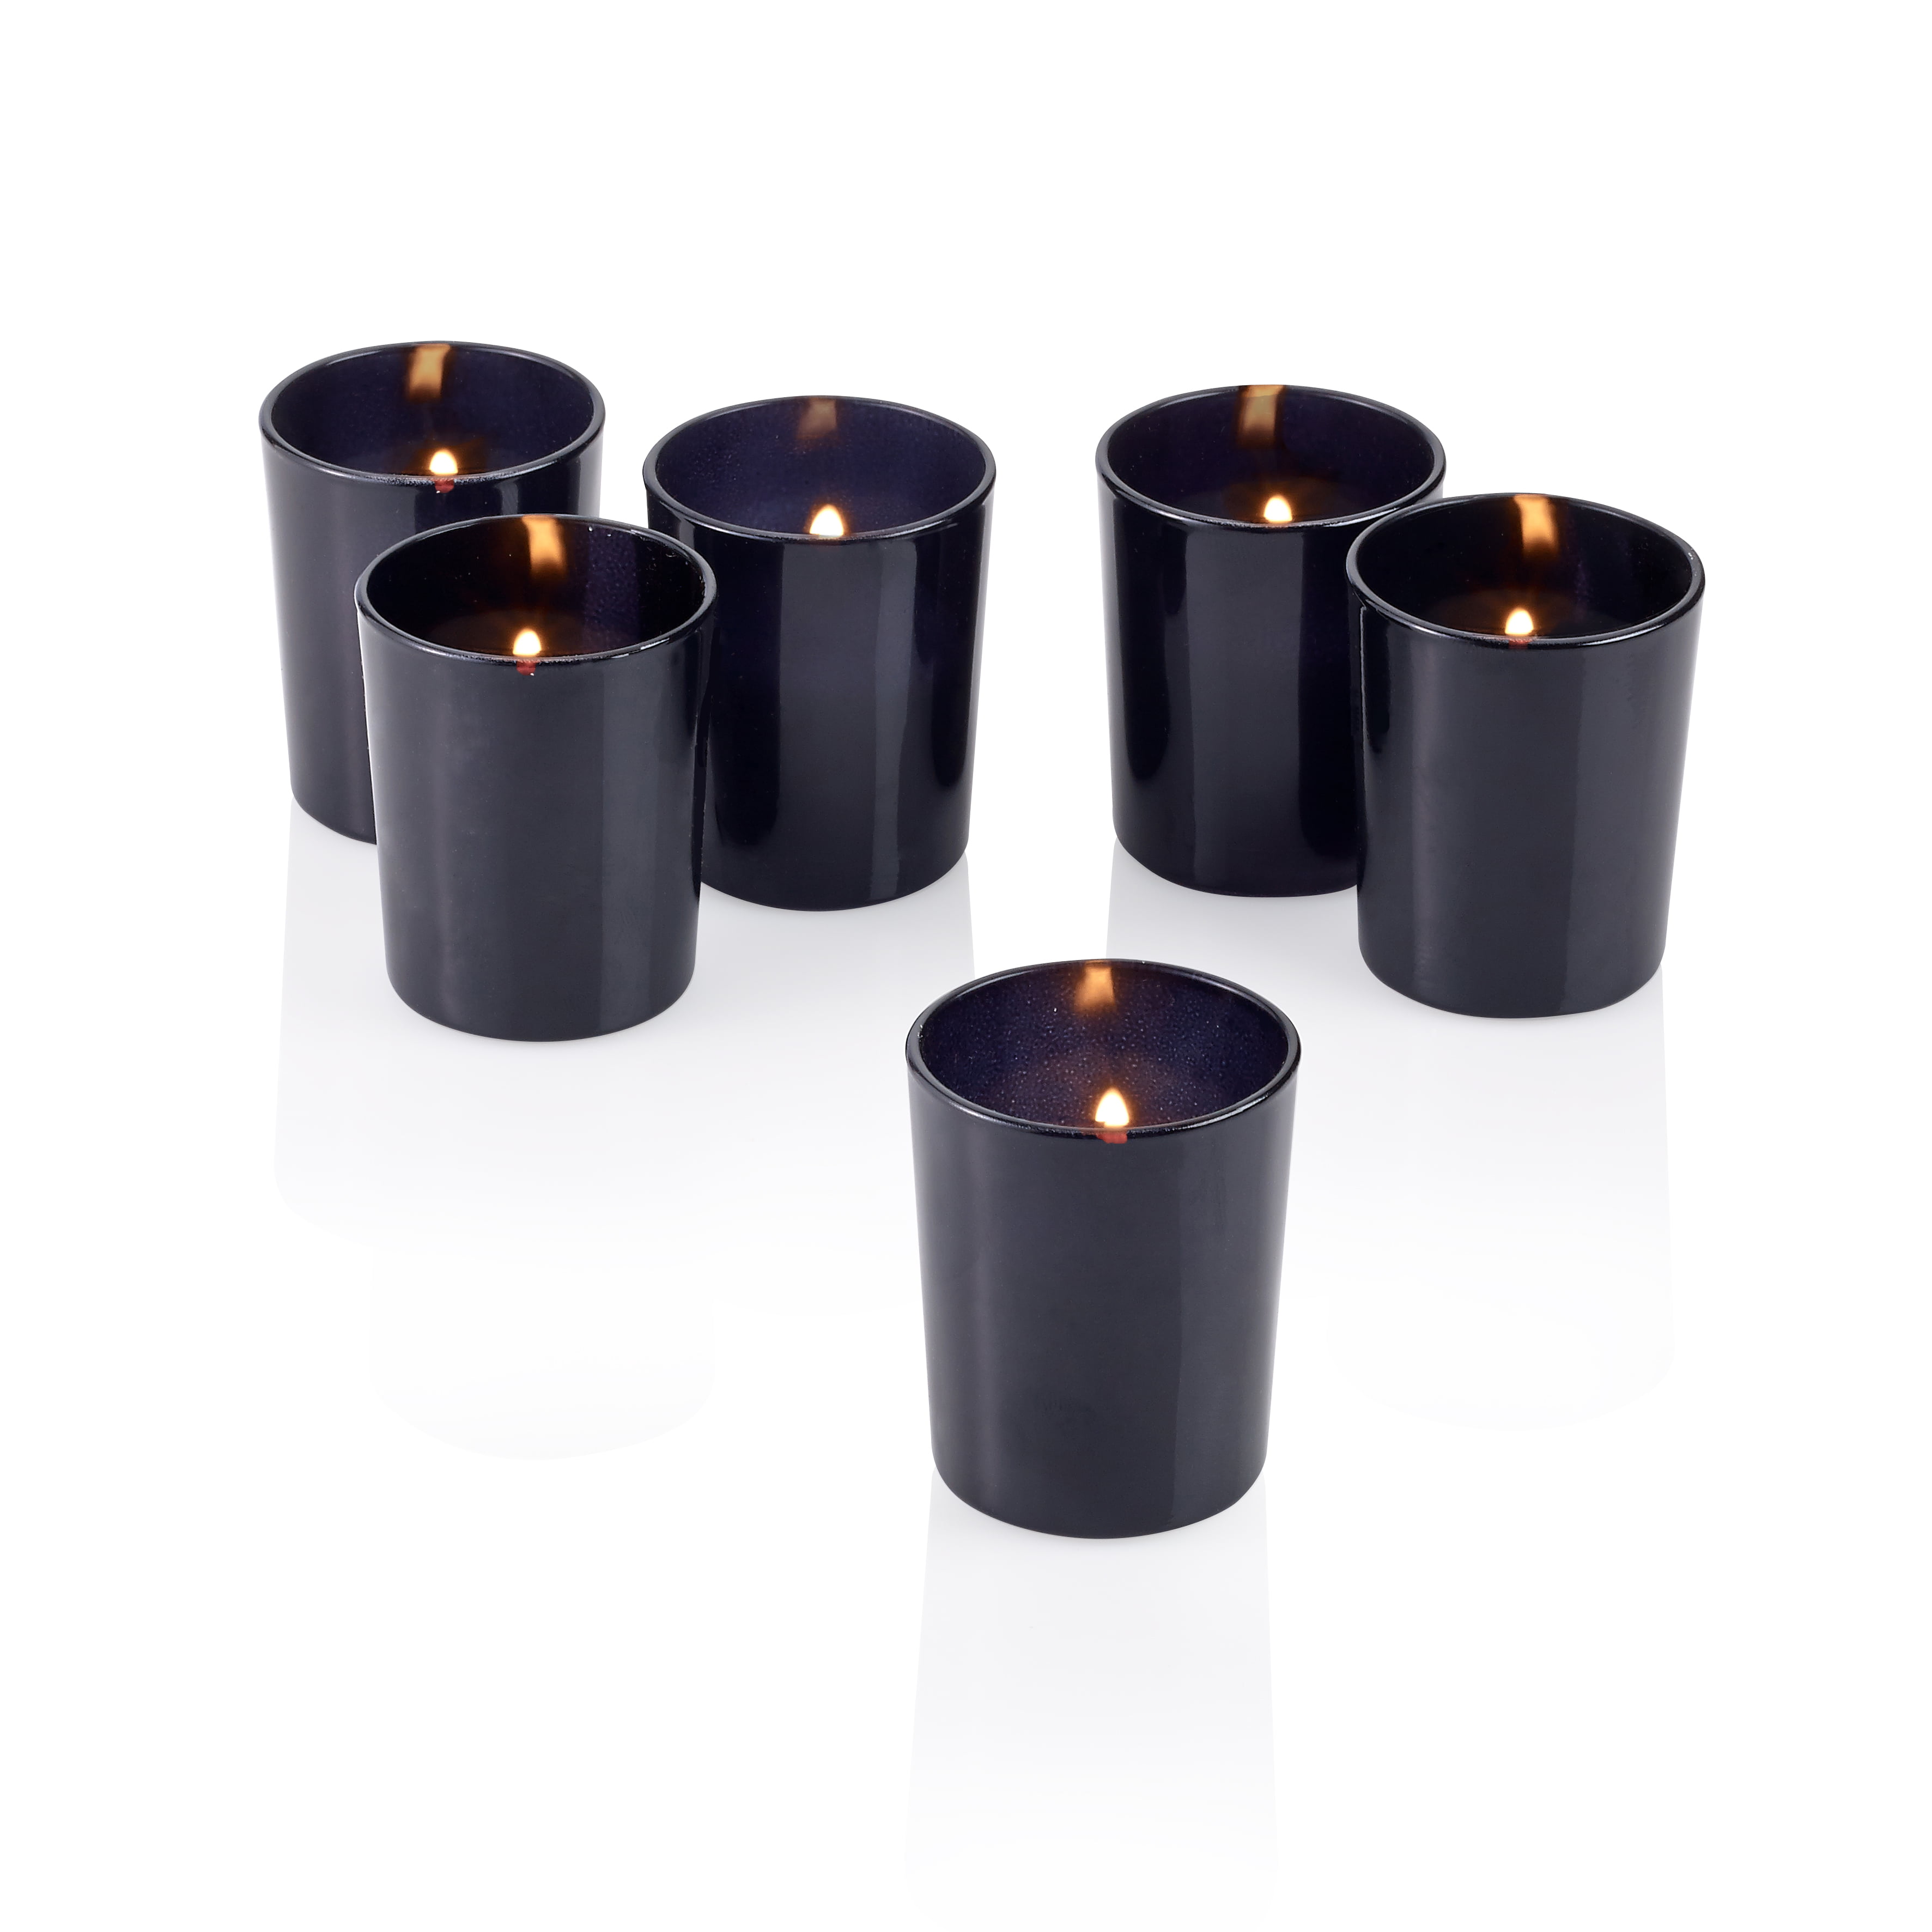 Black Frosted Glass Round Votive Candle Holders With Citronella Yellow Votive Candles Burn 15